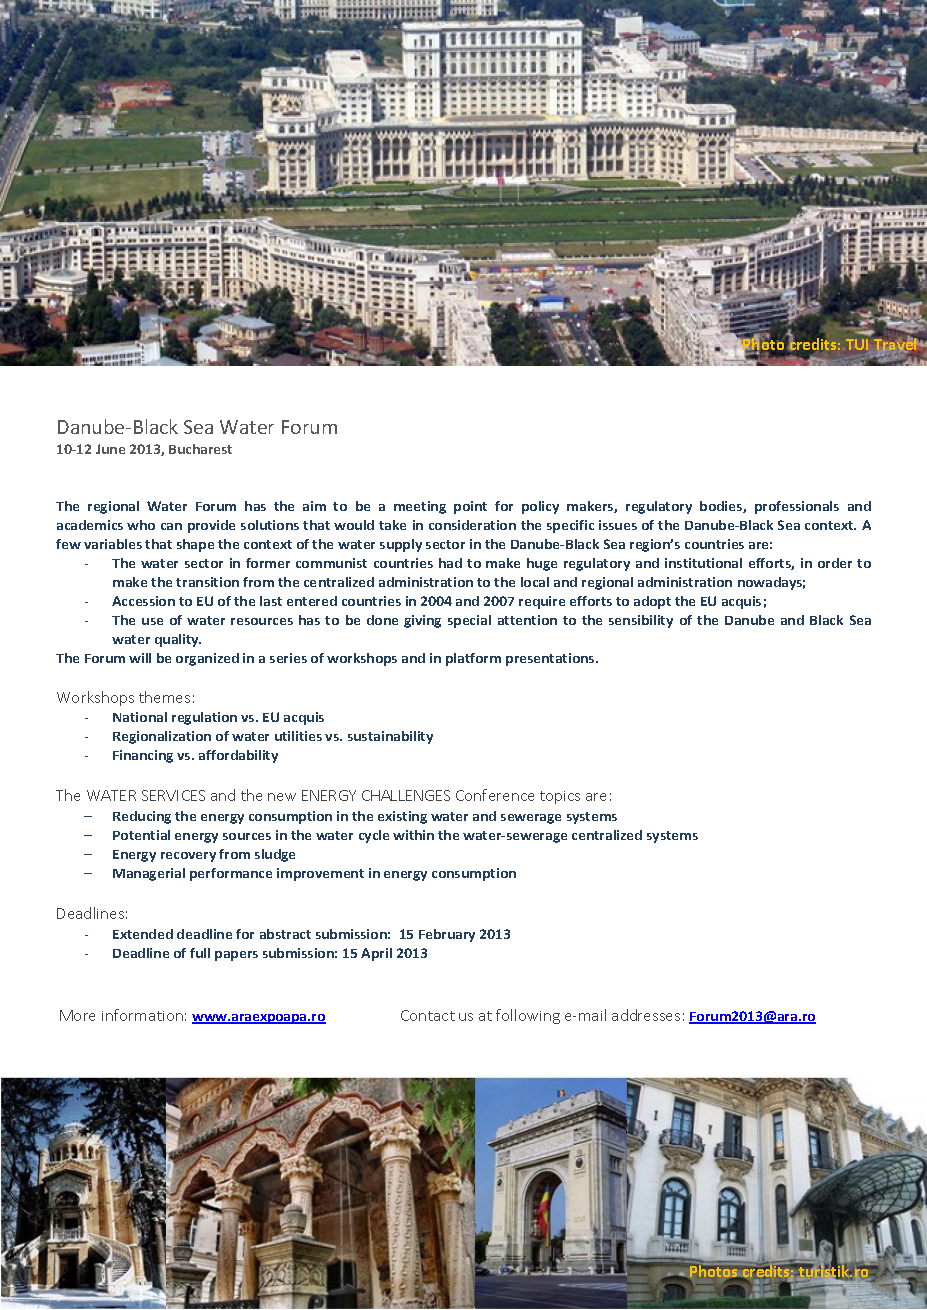 On 10-12 of June 2013 togheter with the 15th edition of EXPOAPA is taking place Danube-Black Sea Water FORUM in the Palace of Parliament, a comp...